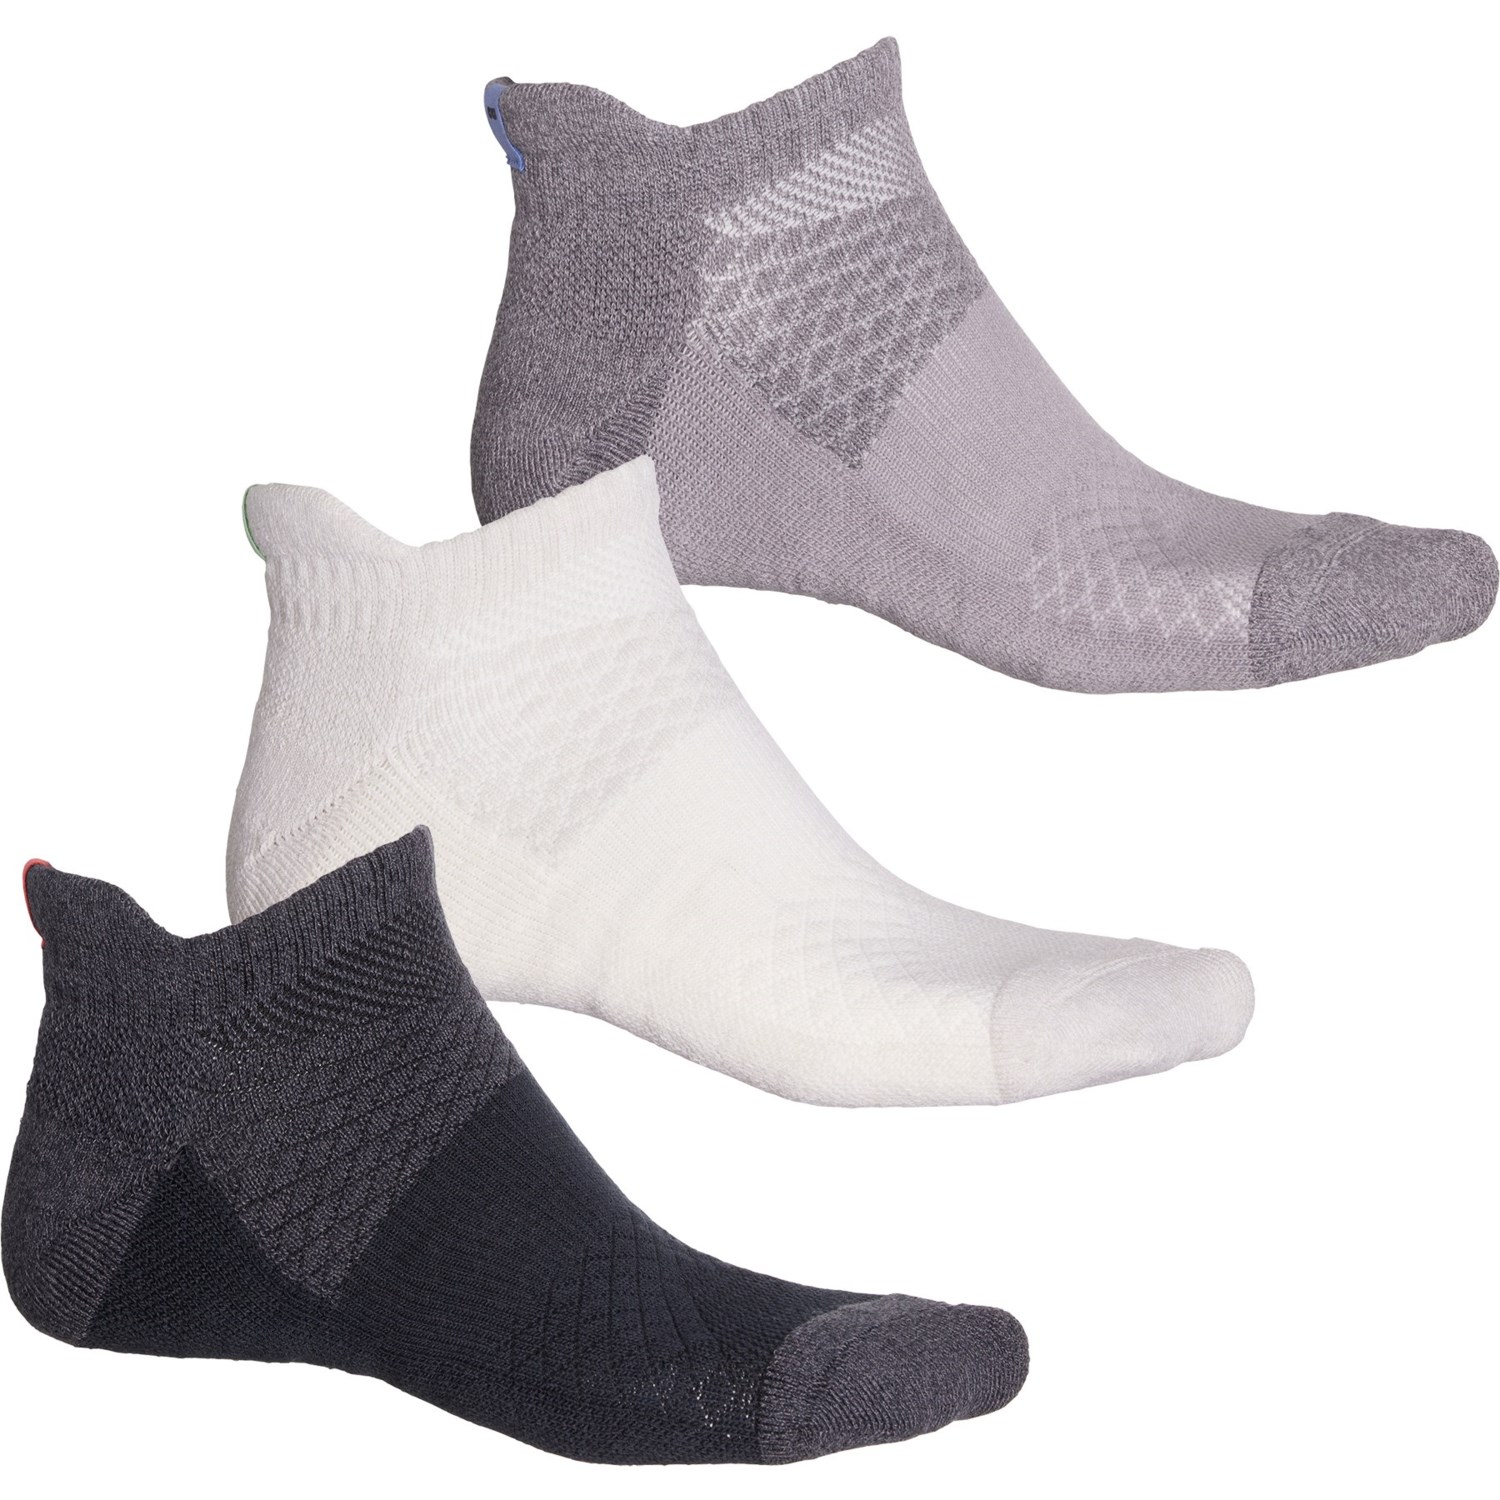 PAIR OF THIEVES Hustle Nation Socks (For Men) - Save 46%